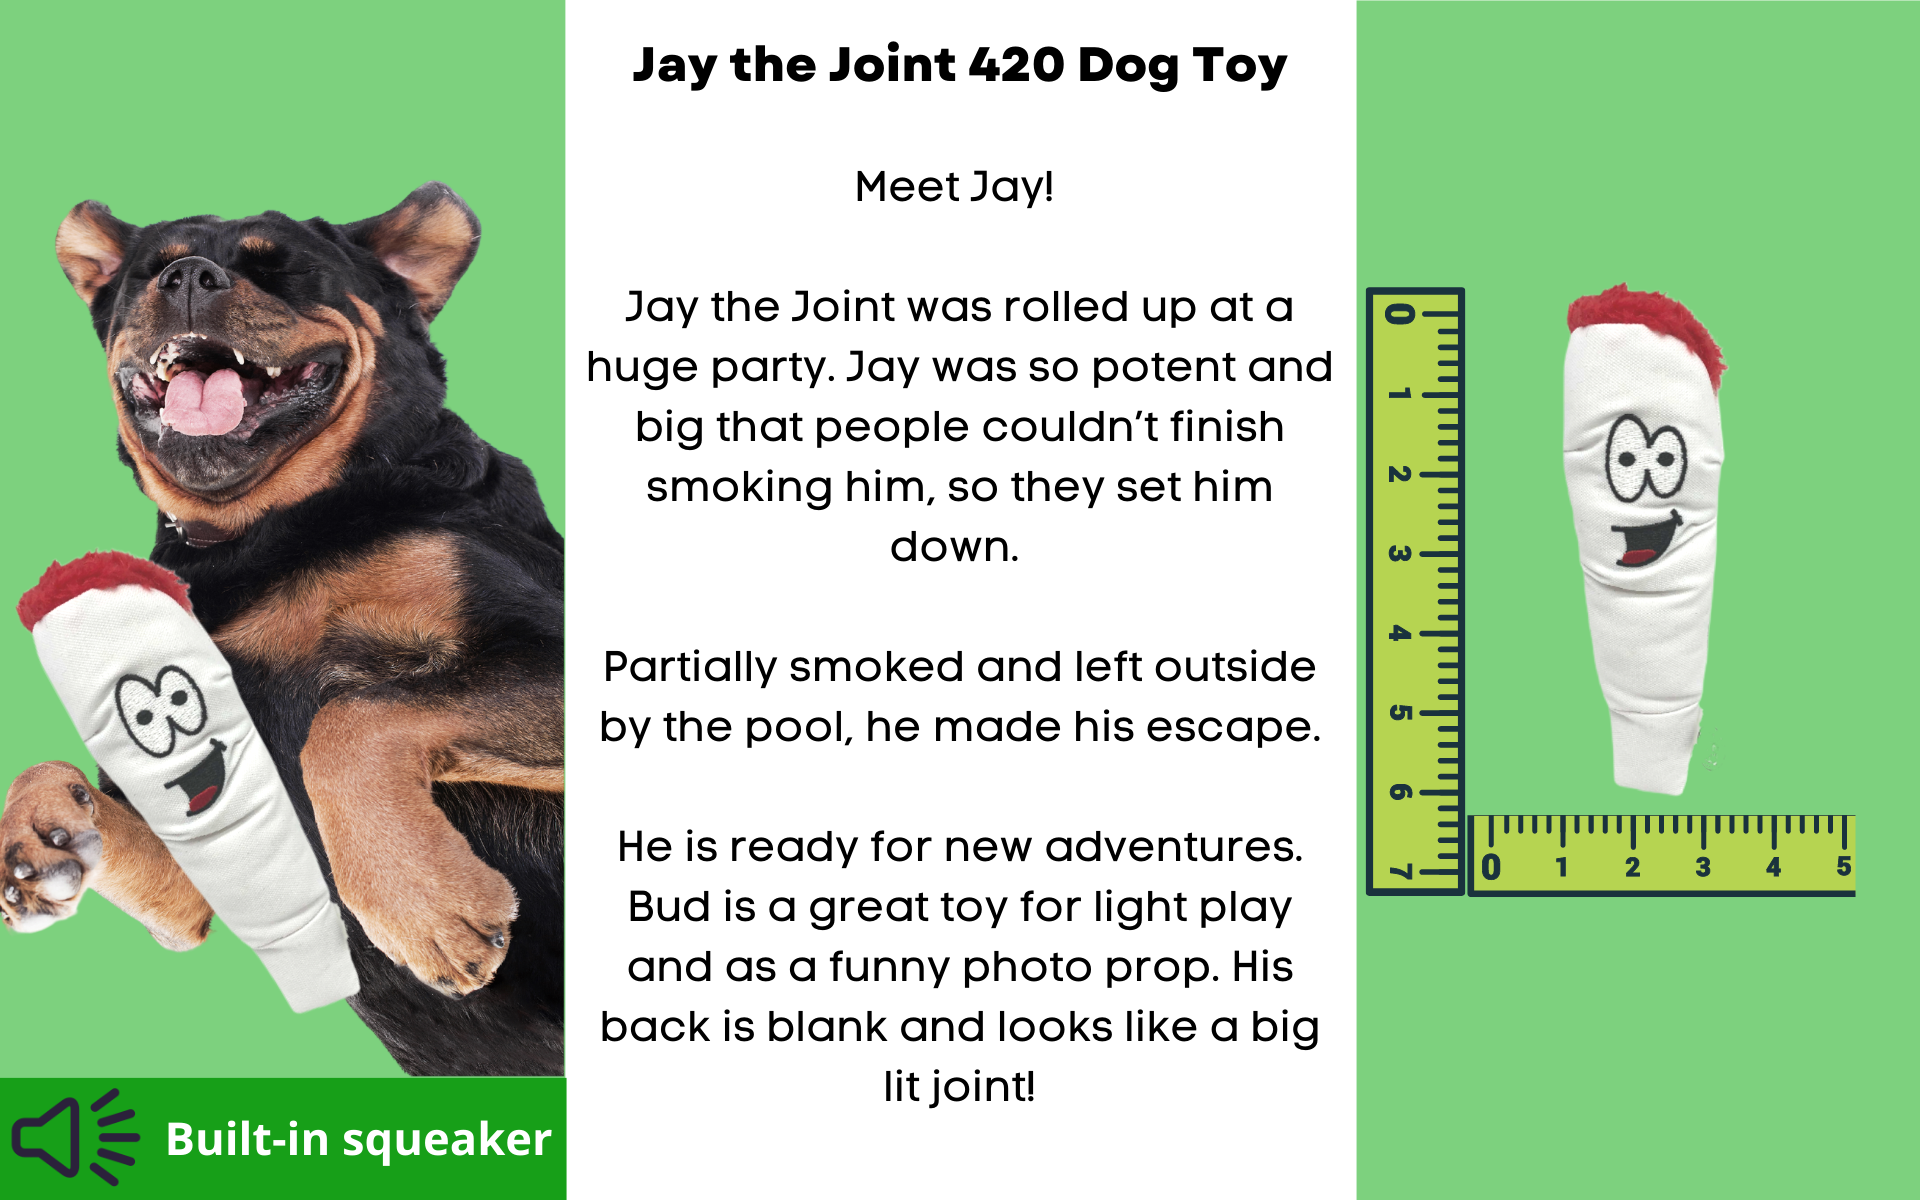 Jay the Joint 420 Dog Toy